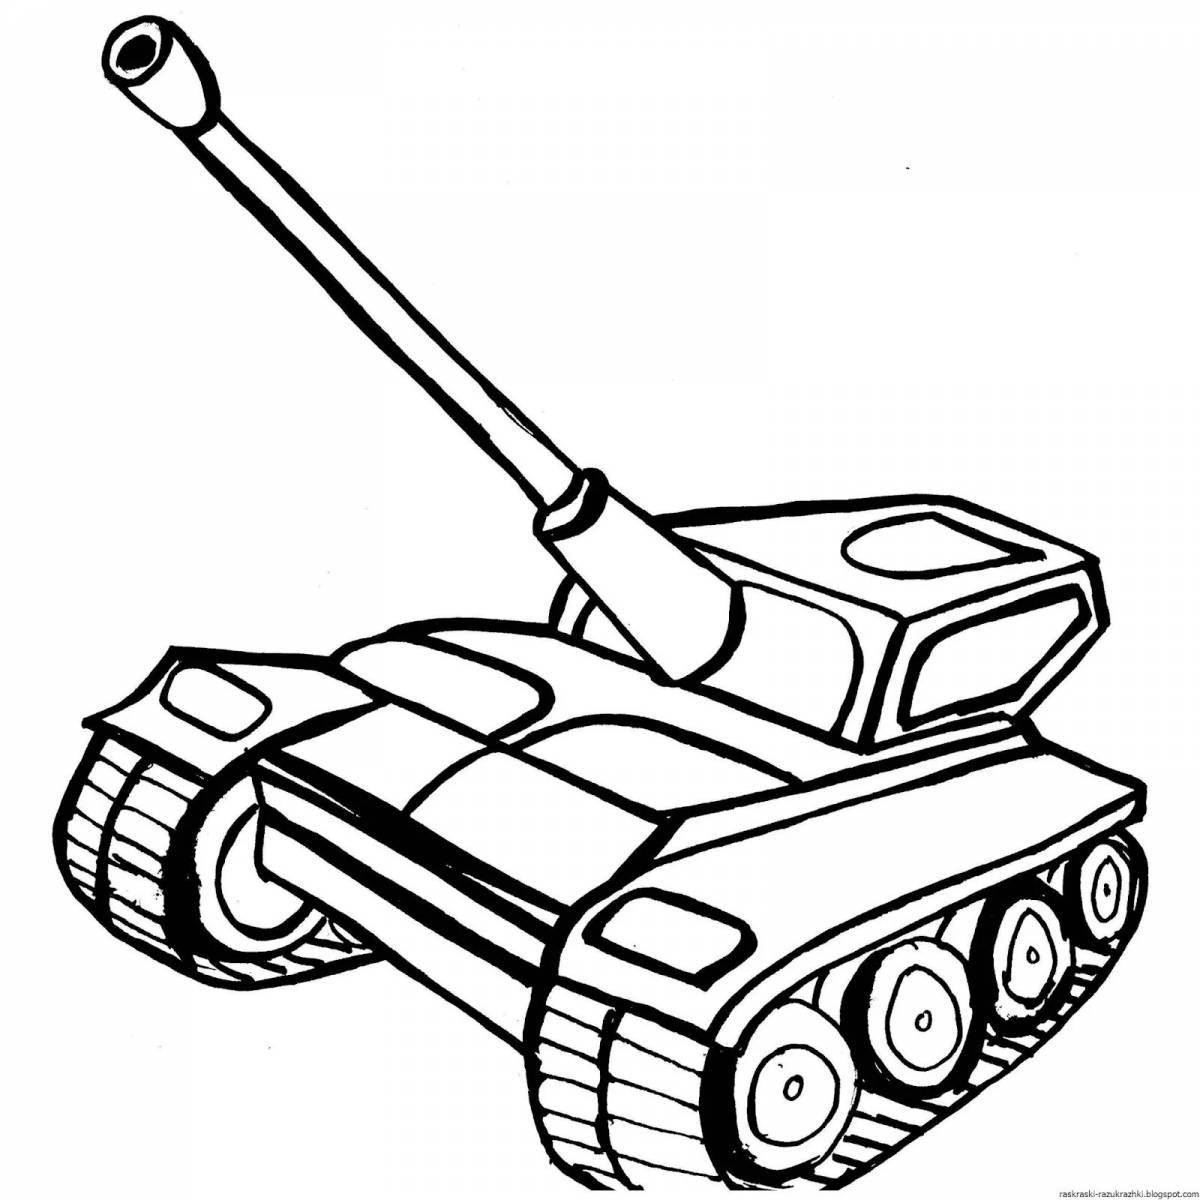 Happy little tank coloring page